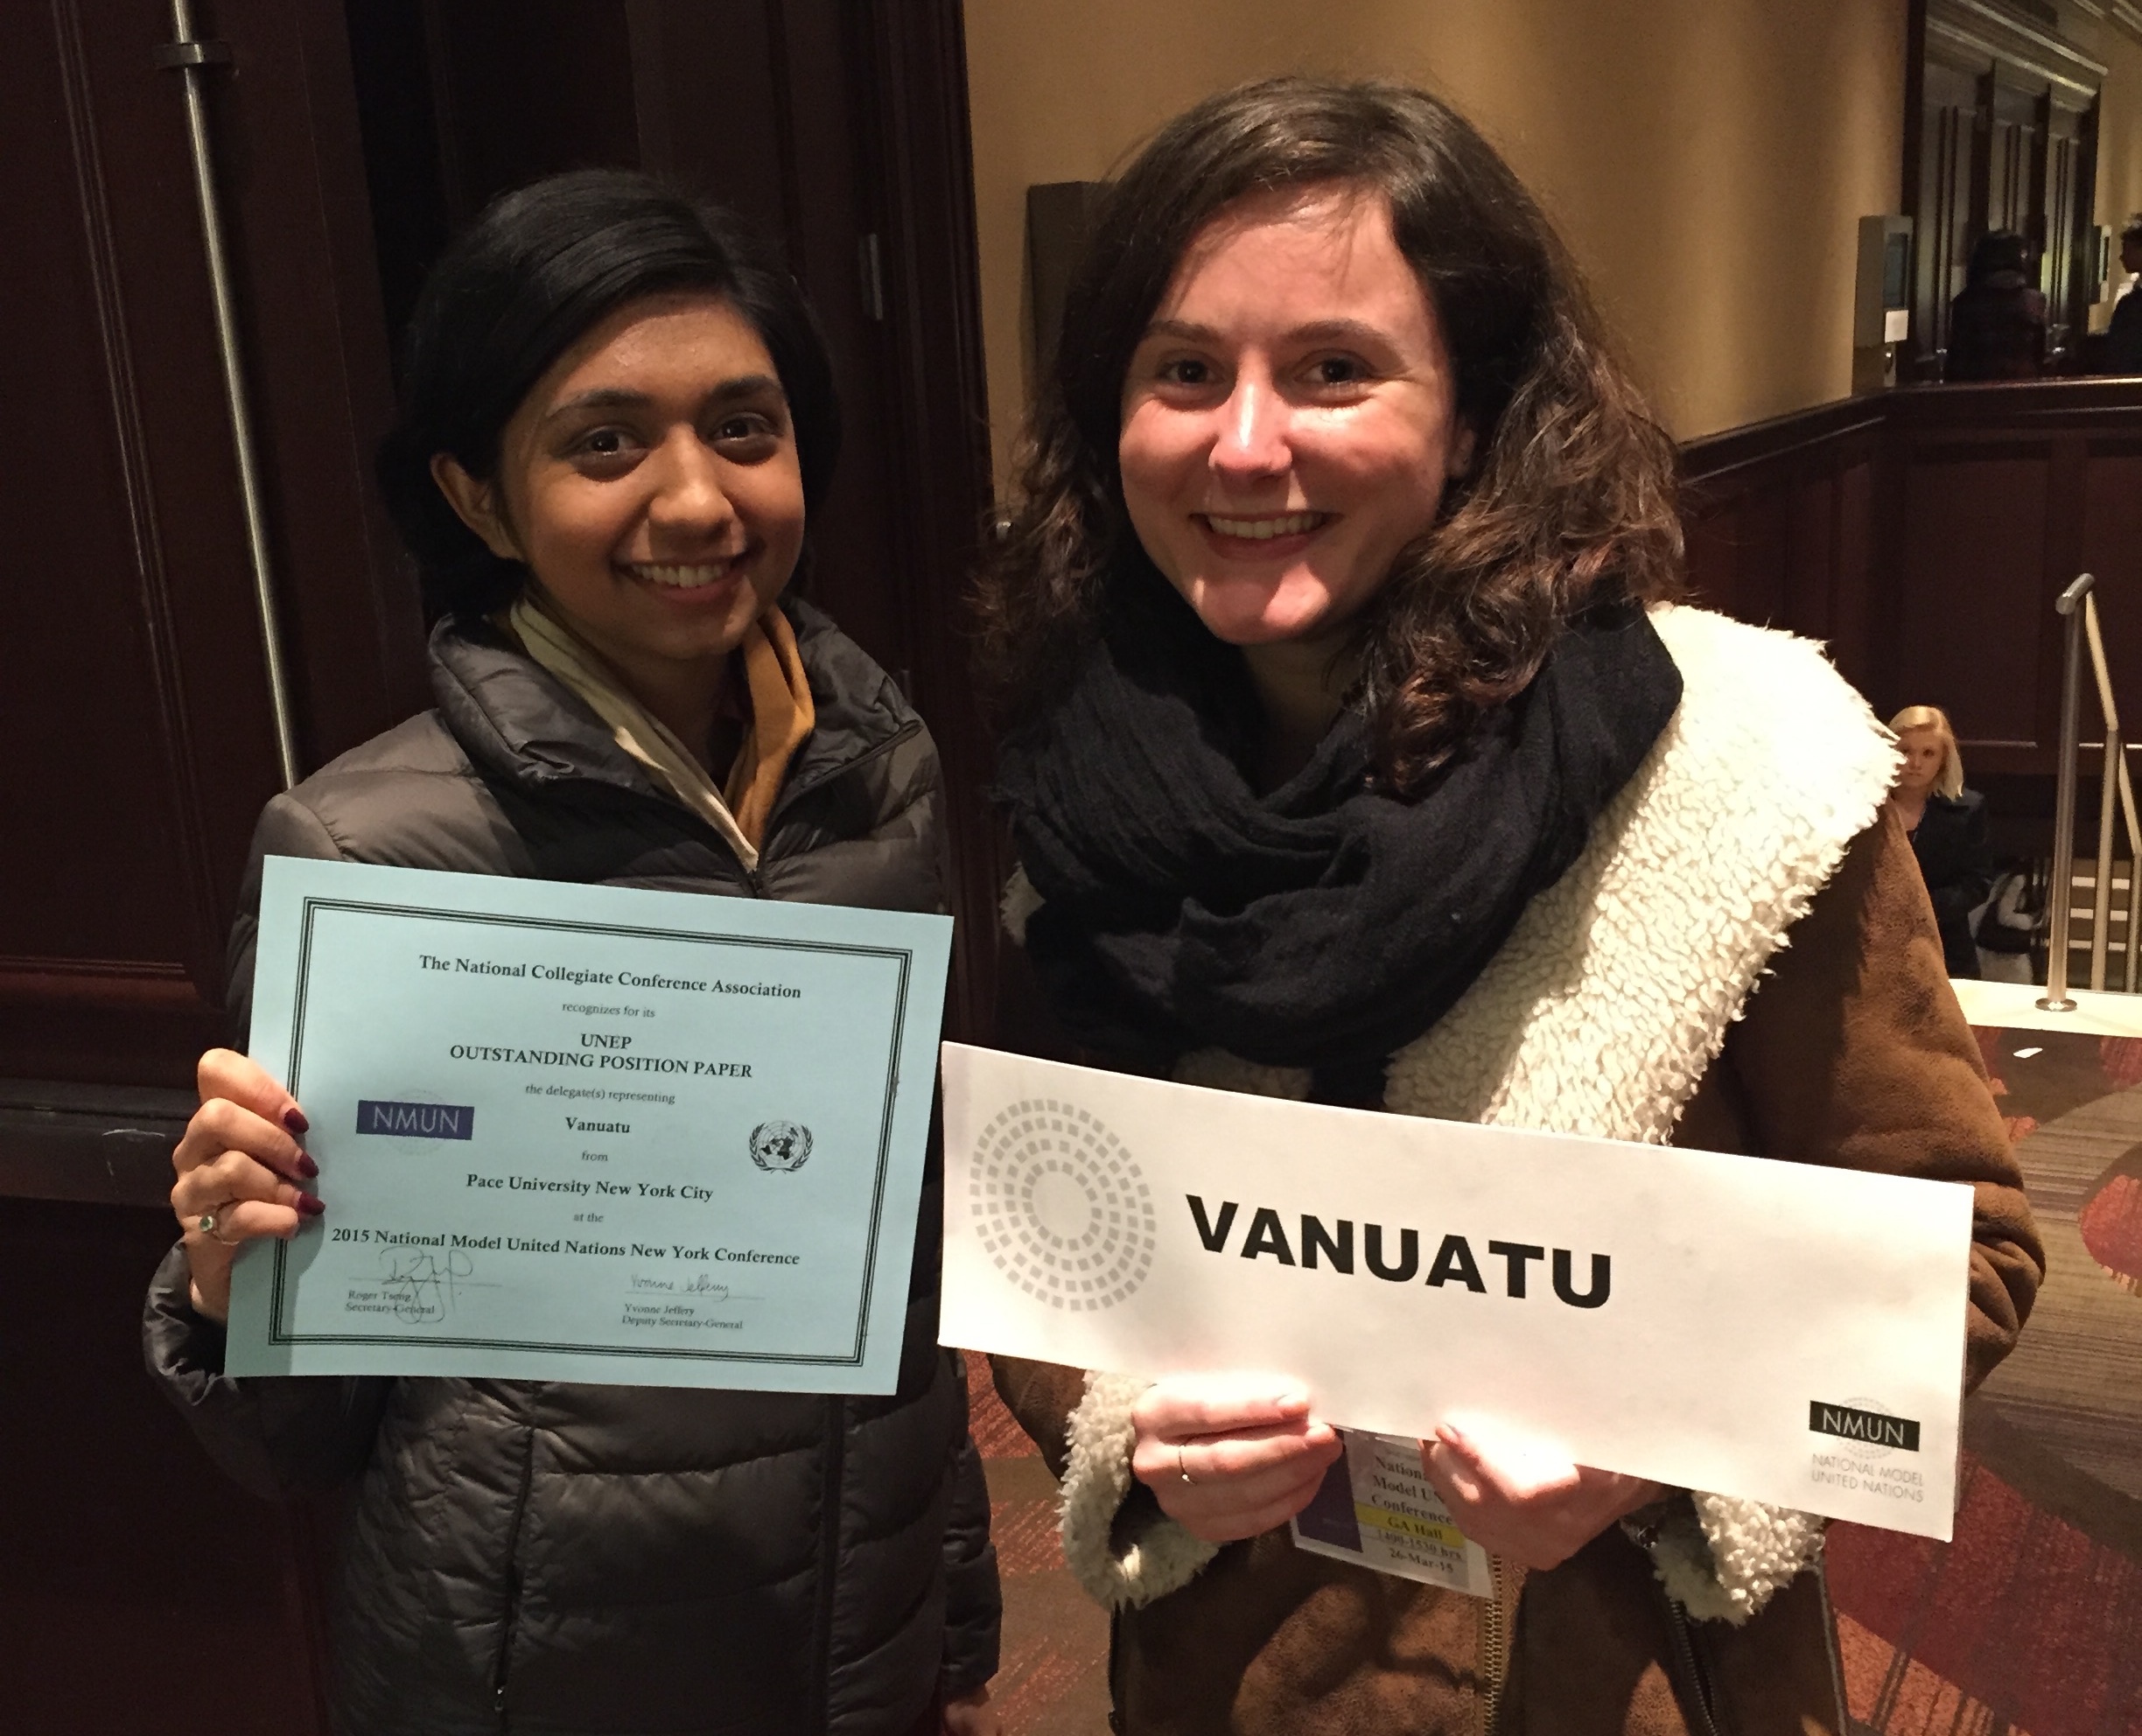 Pace students Sherin Shetty (left) and Amandine Tristani (right), displaying their Outstanding Position Paper award at the end of the 2015 National Model United Nations conference in New York City.